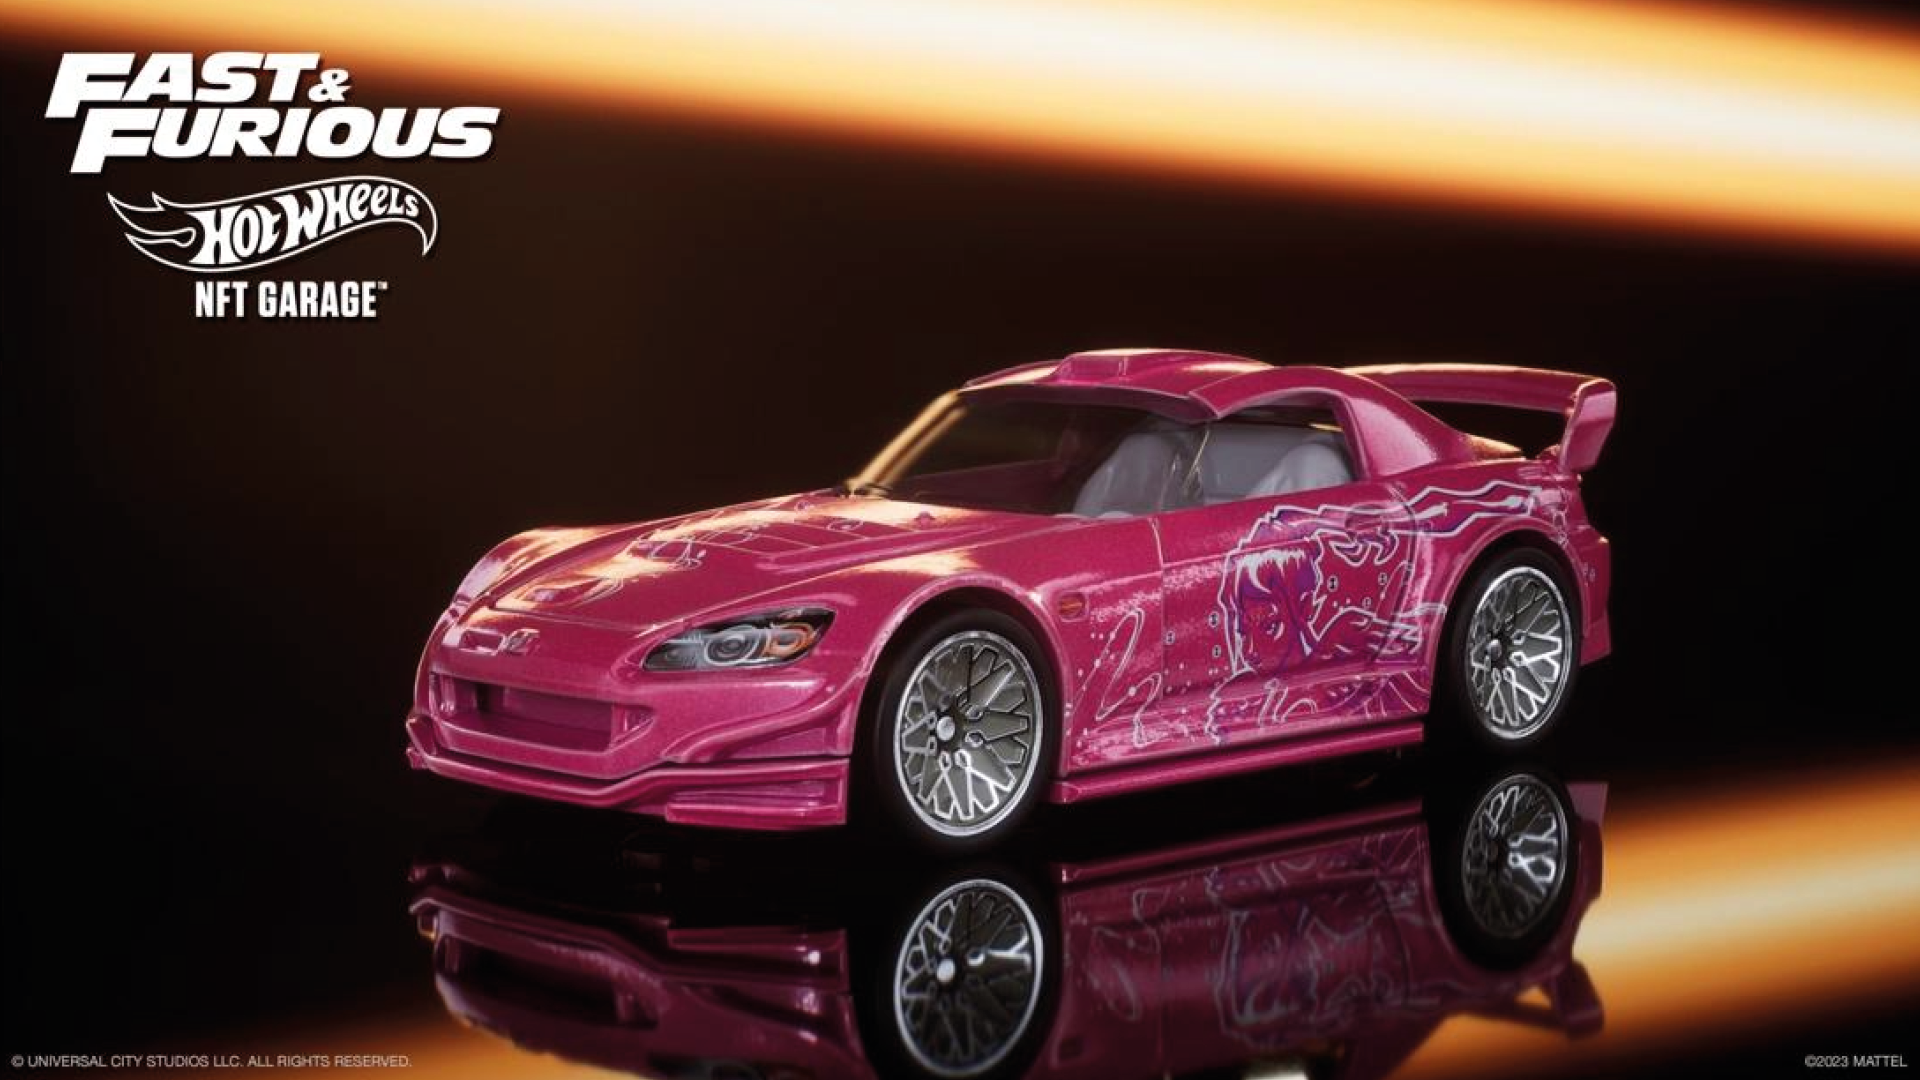 Fast & Furious' Collectibles Race into the Hot Wheels NFT Garage